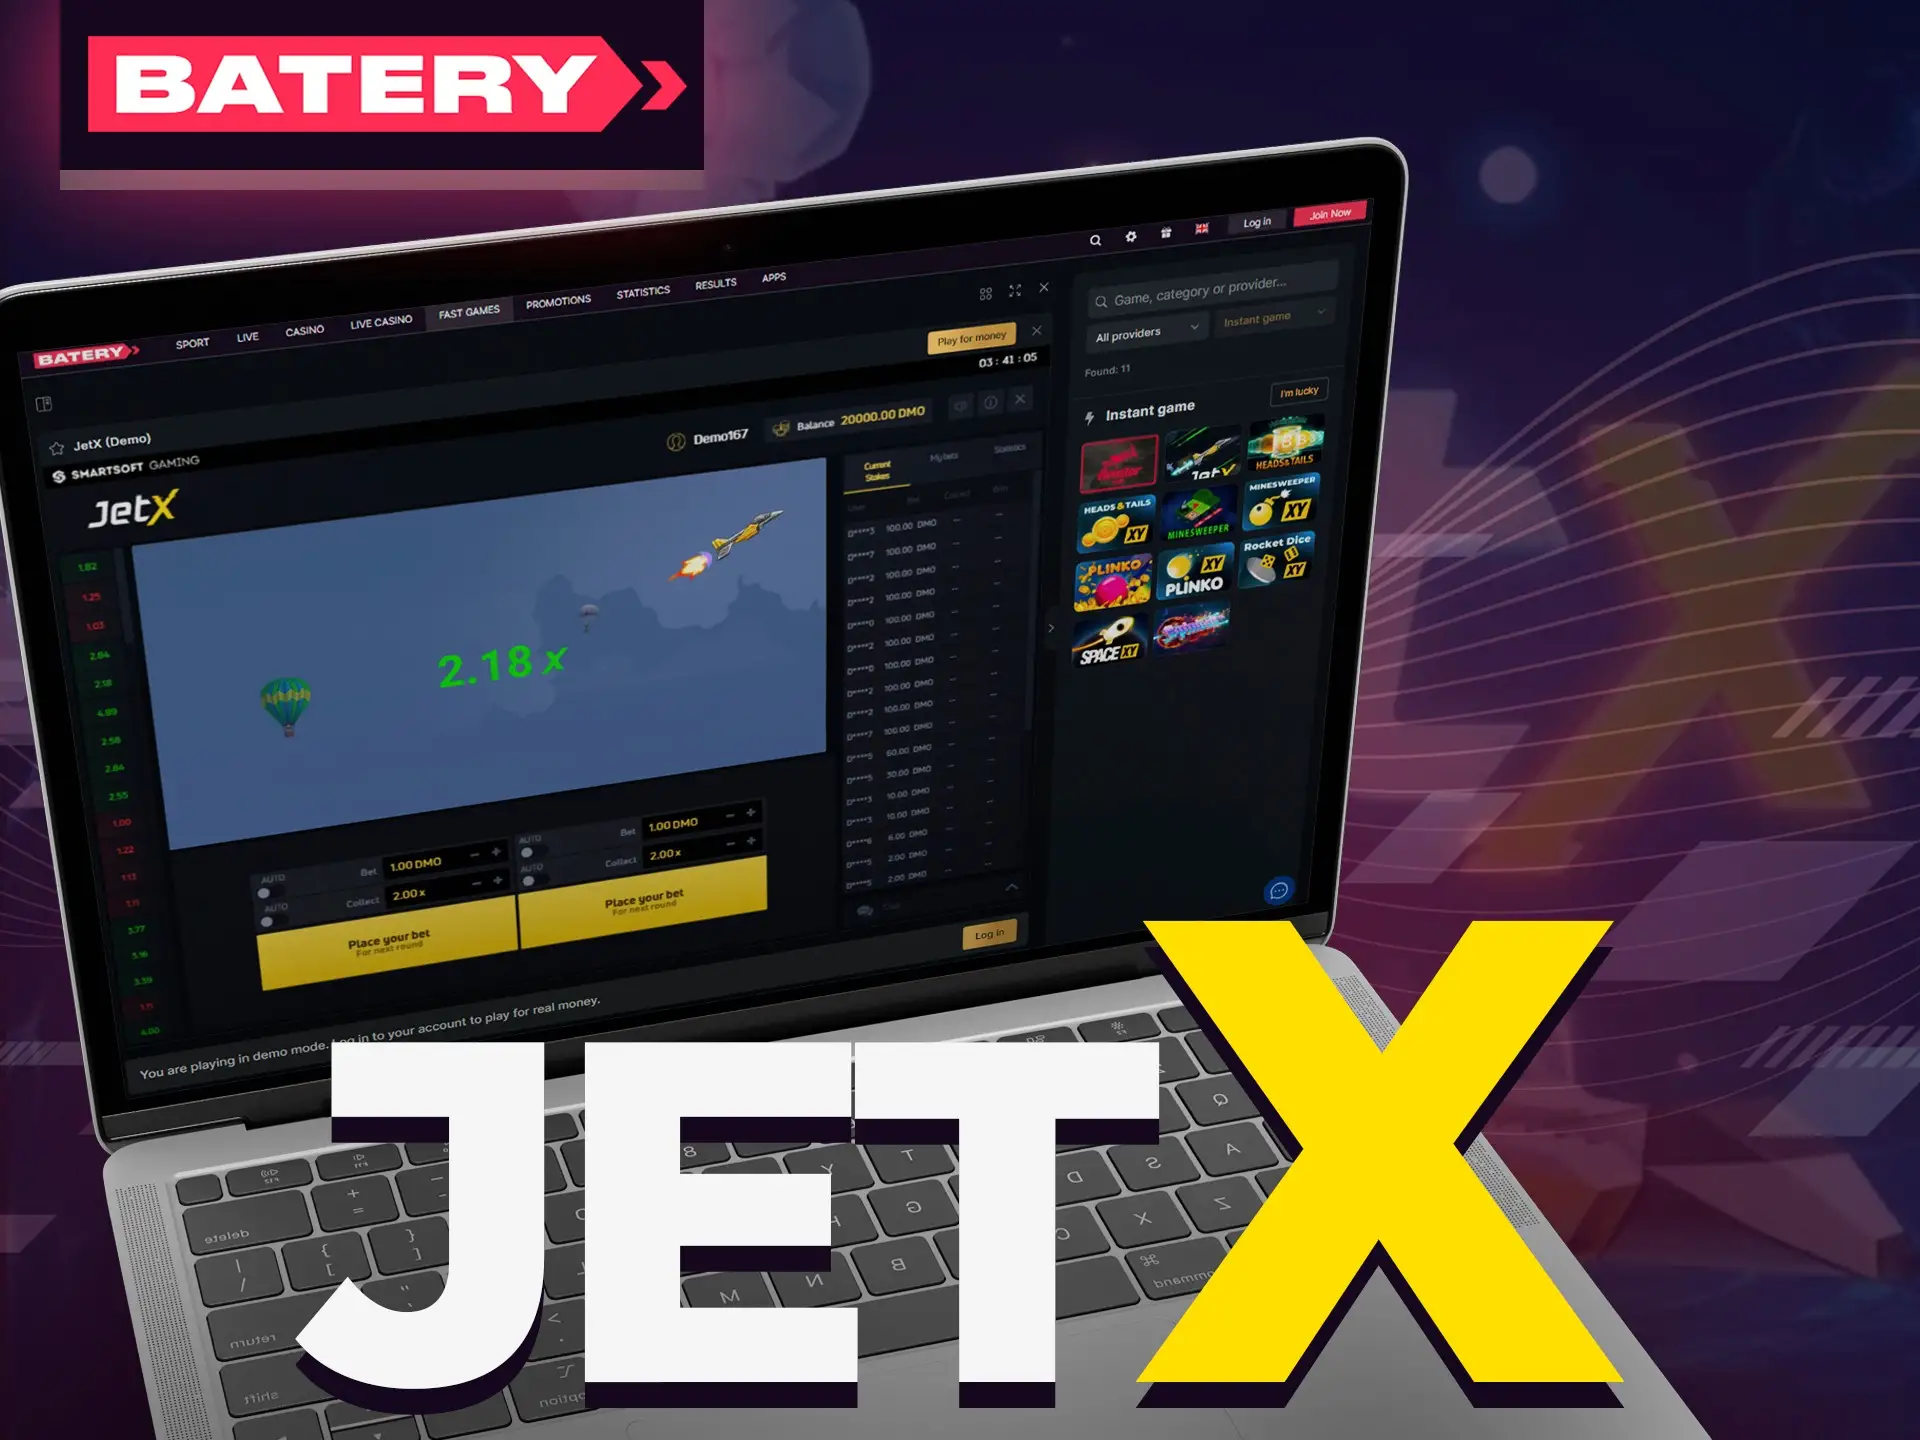 Win money by playing JetX game at Batery.